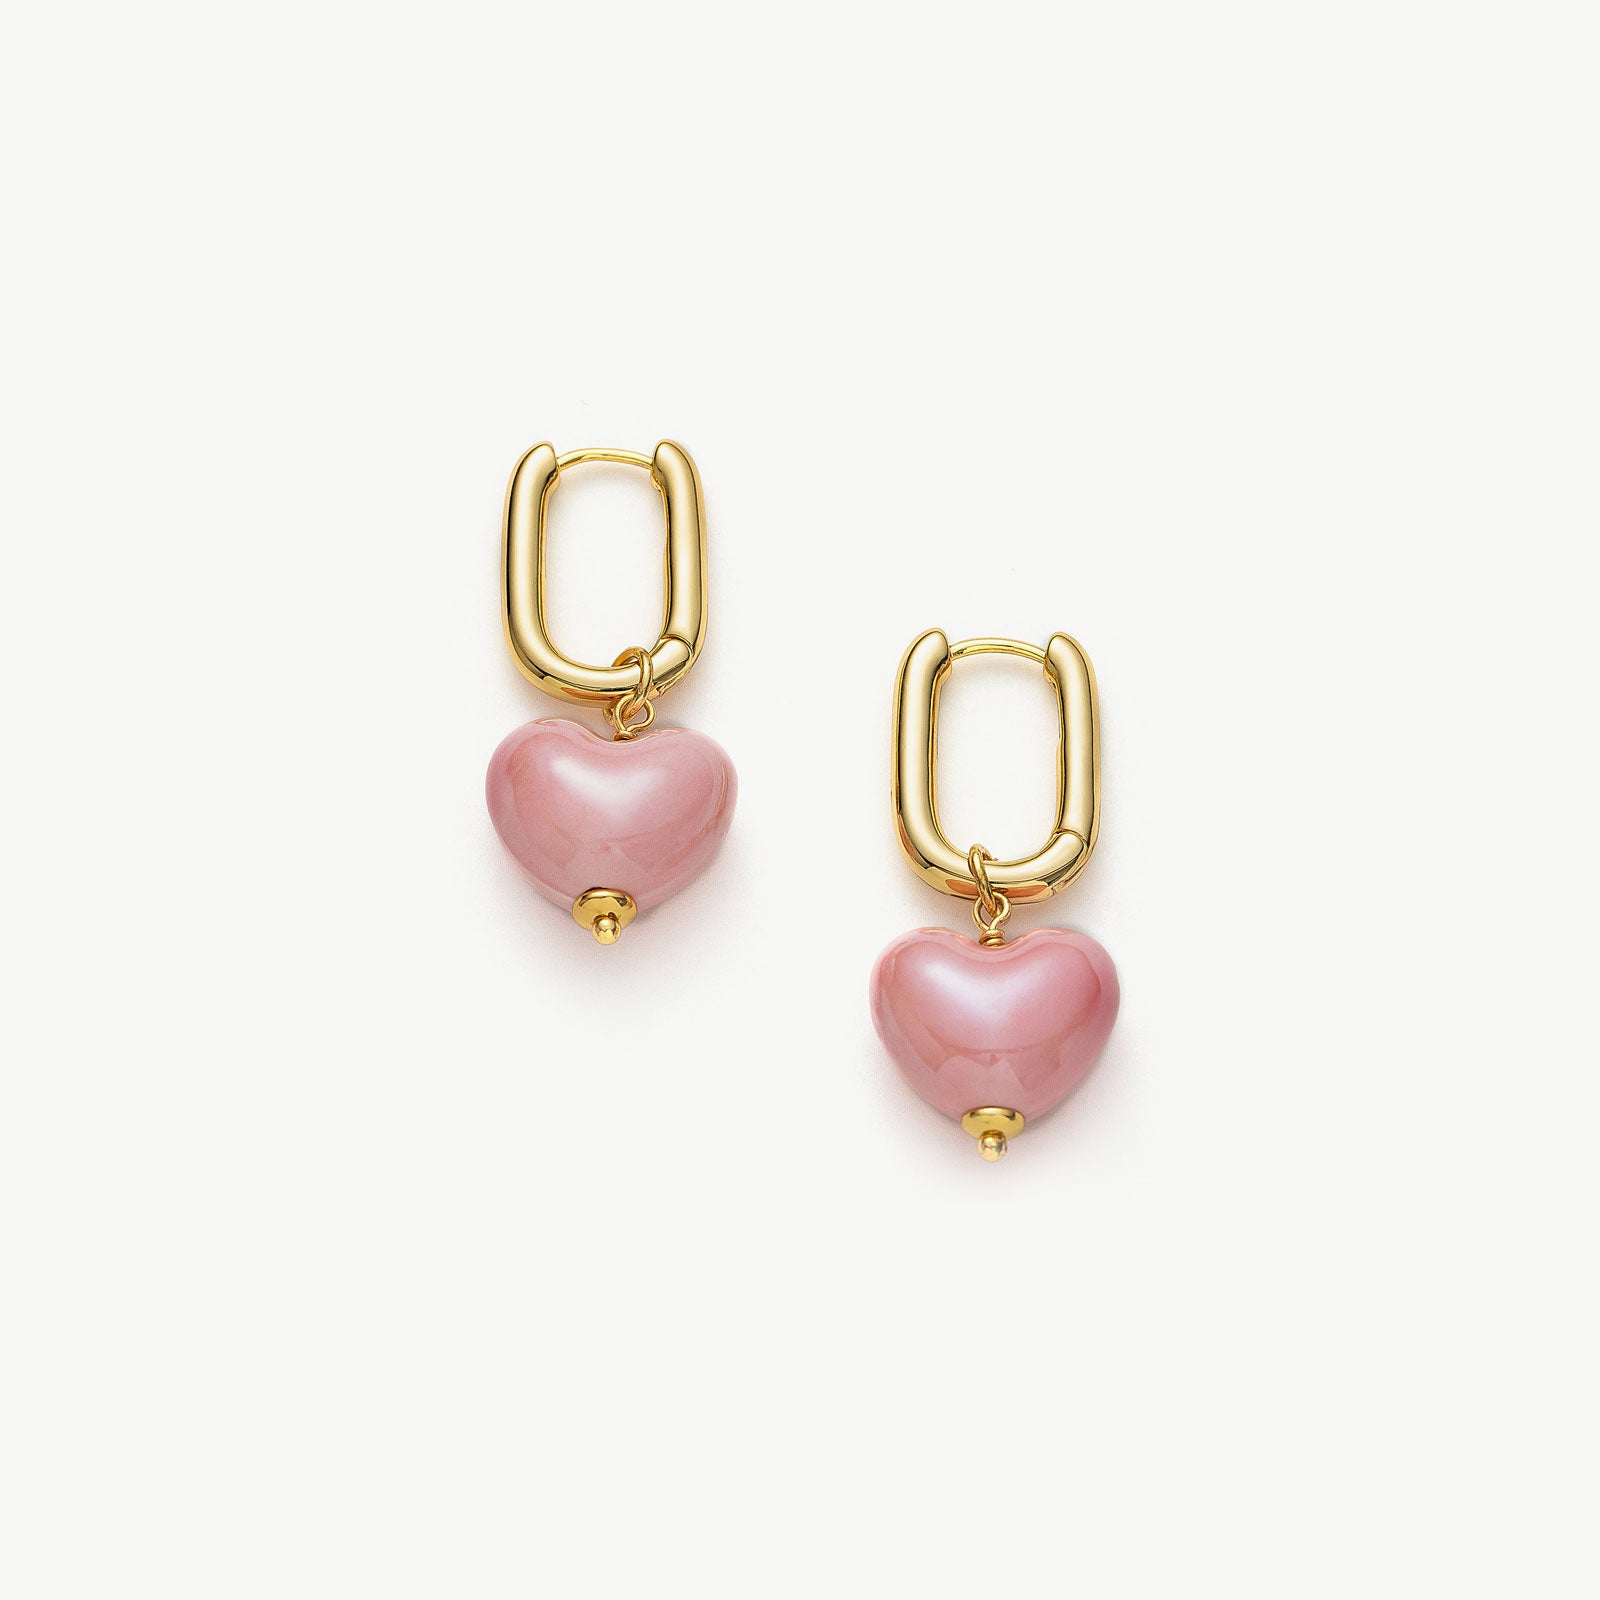 Ceramics Heart Hoop Earrings in Pink, a romantic and blush-toned accessory that adds a touch of love and charm to your ear ensemble.